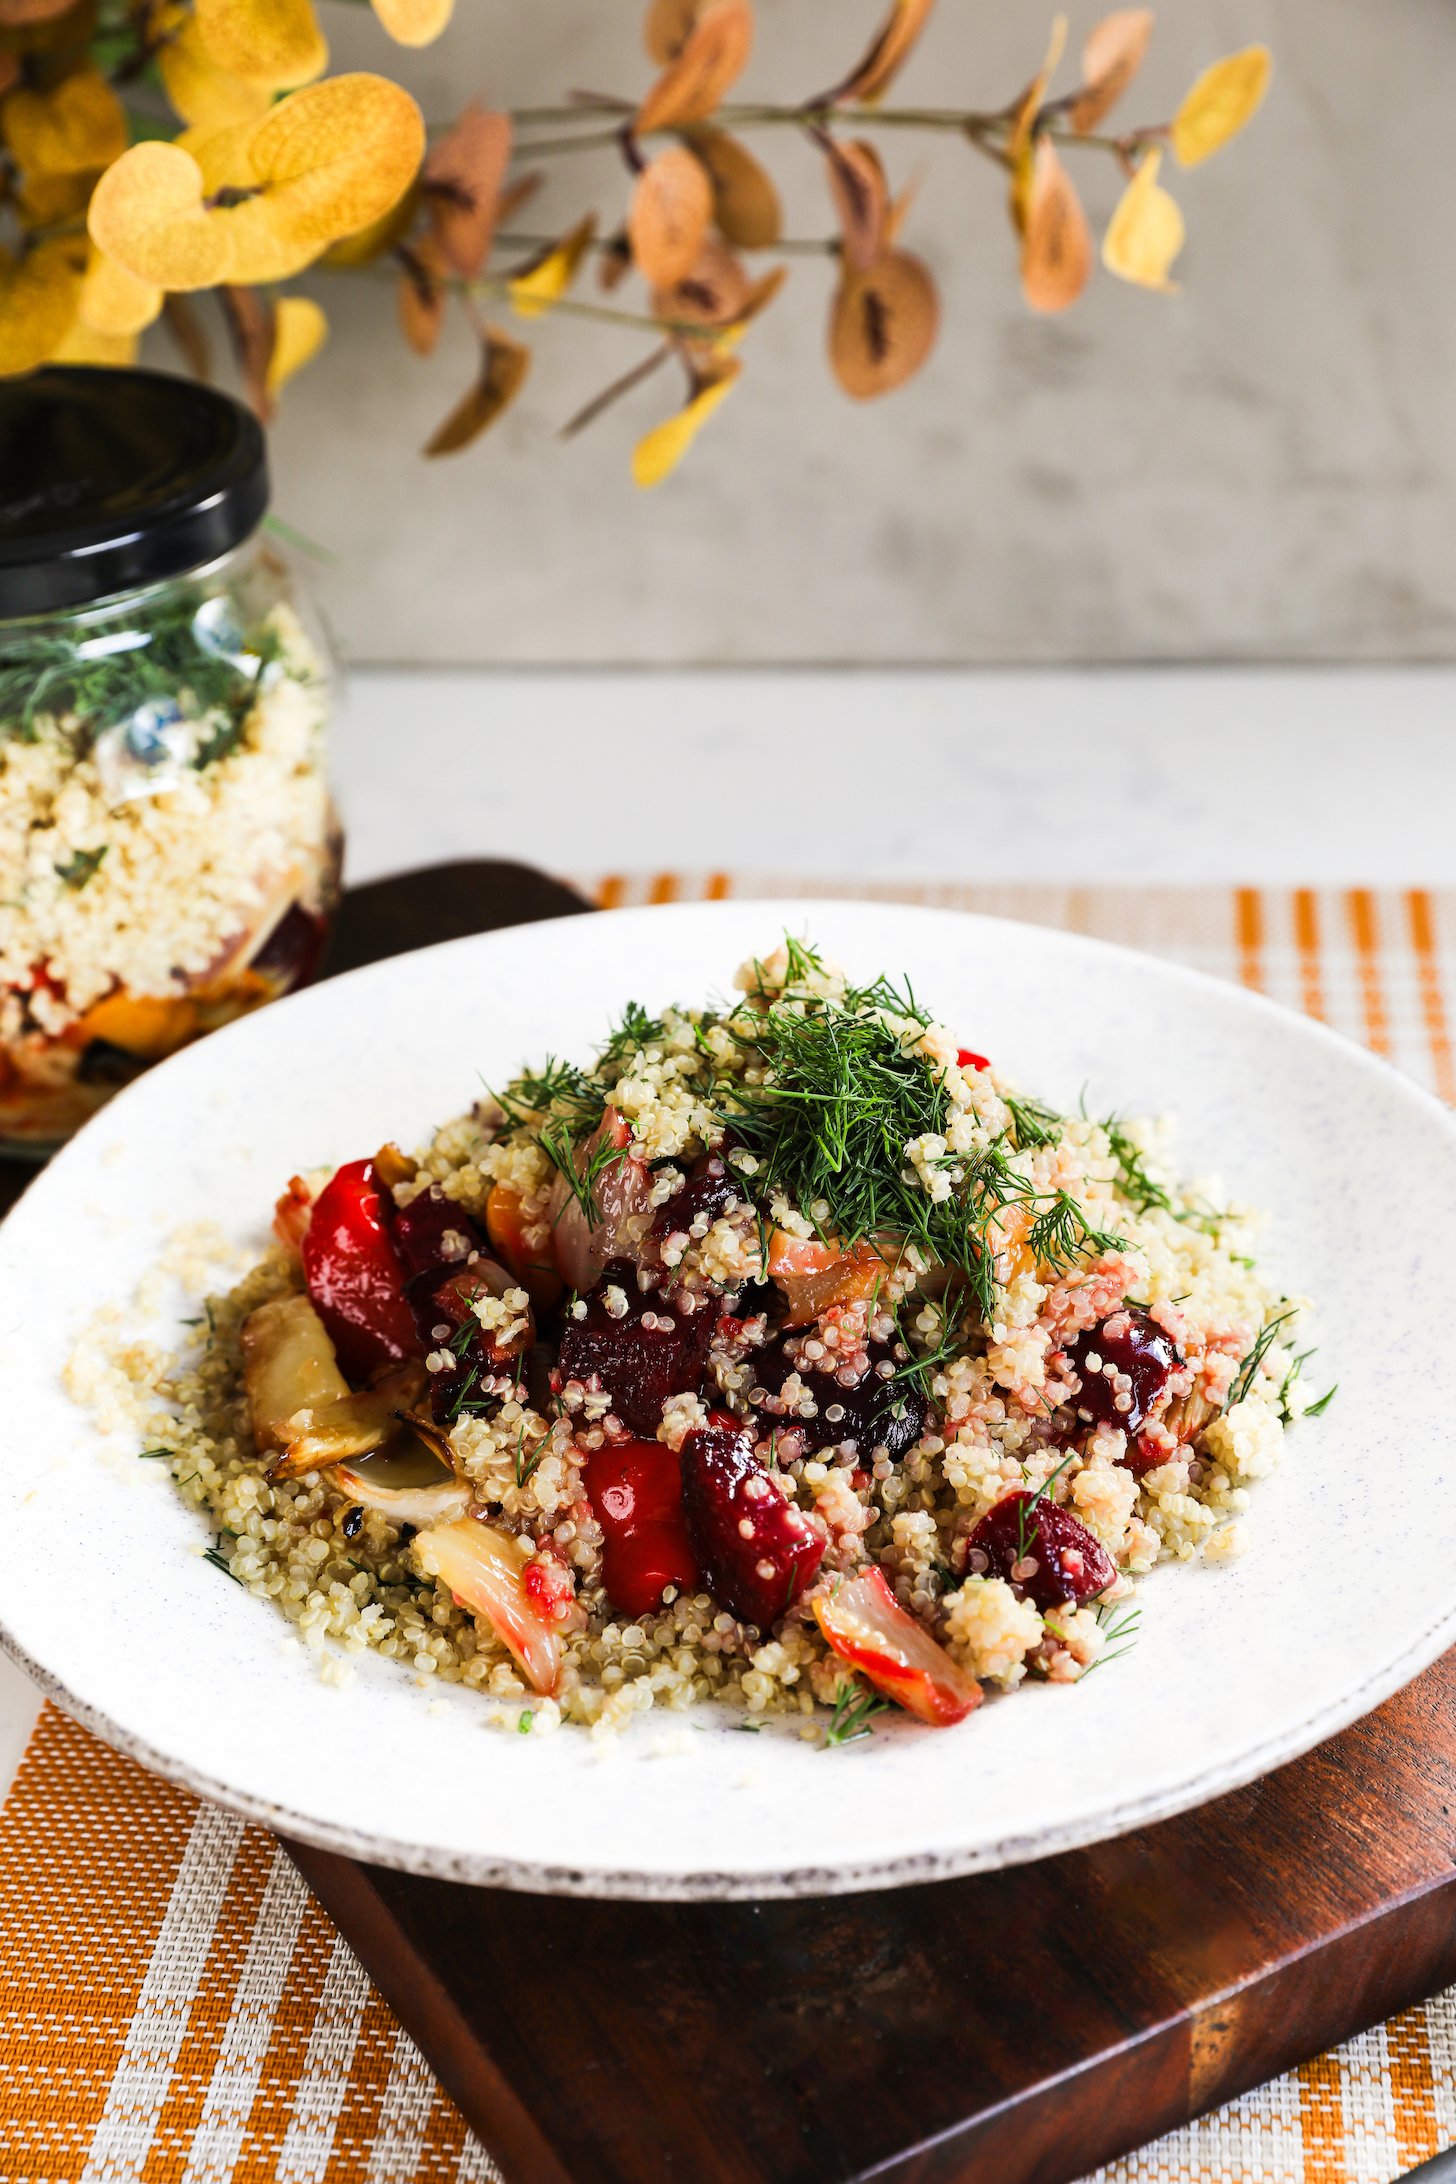 A plate of salad featuring a delightful mixture of quinoa, roasted beets, peppers, and fennel, topped with dill and doused in dressing with a glass salad jar nearby.